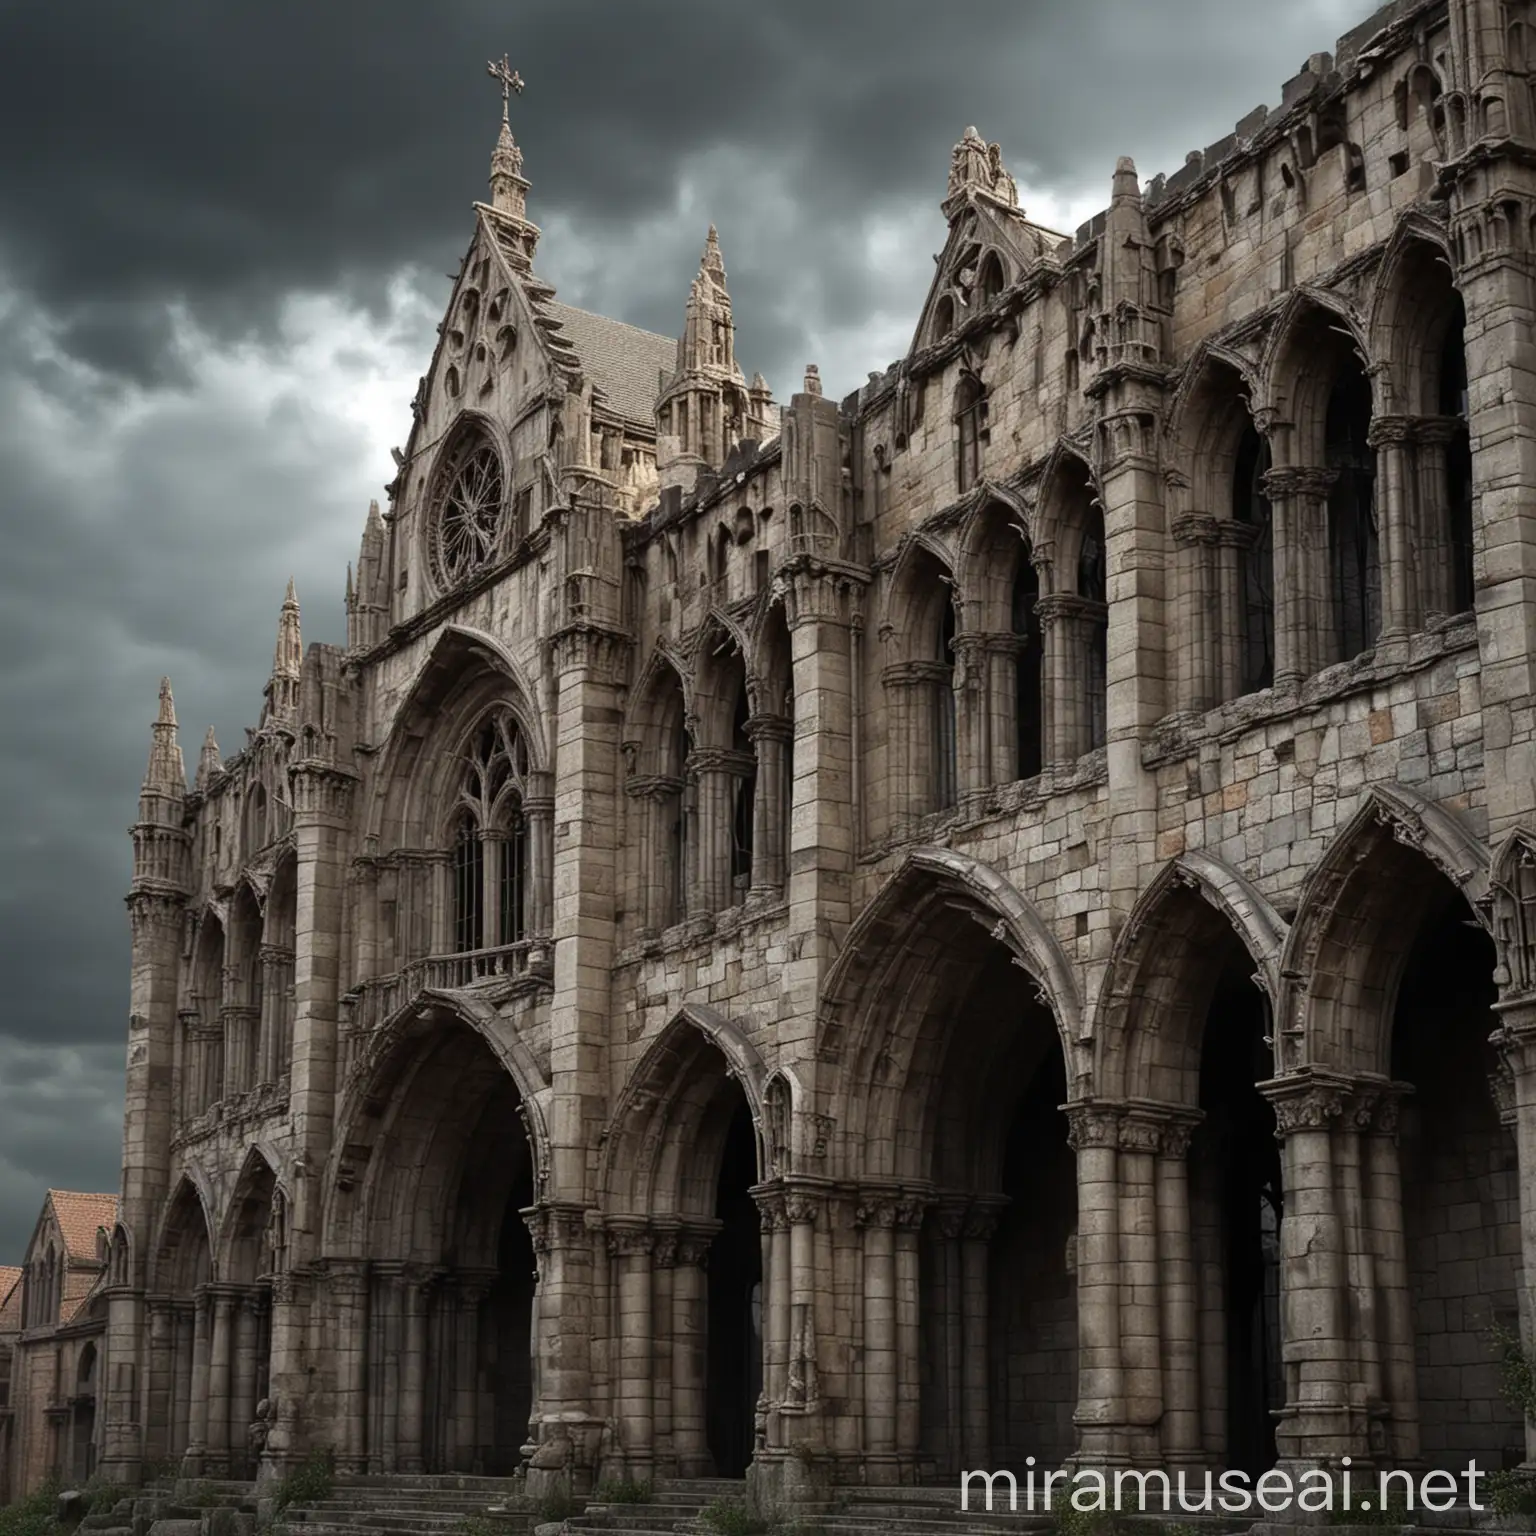 Temple of Minerva Medica in Gothic Style, Dark Ages, Gothic architecture, the gargoyles, Flying Buttresses, Exterior shot, Realistic